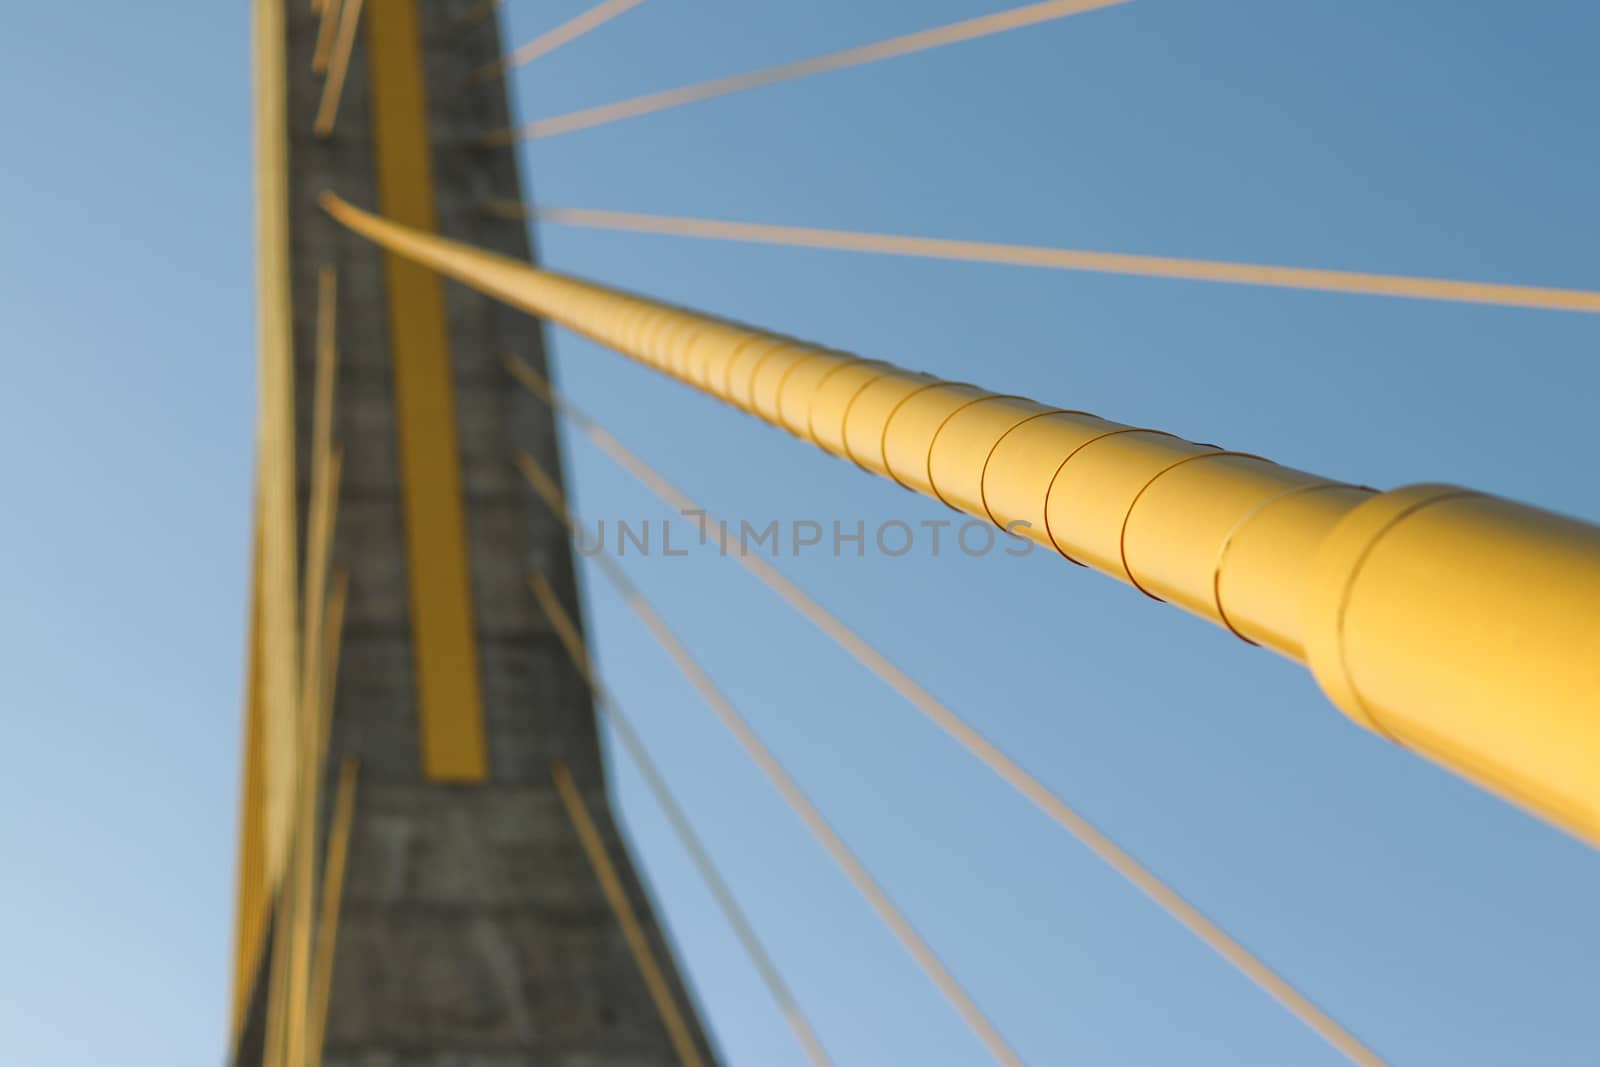 The yellow cable of the suspension bridge. The cable of the suspension bridge will have tension to support the weight of the bridge.